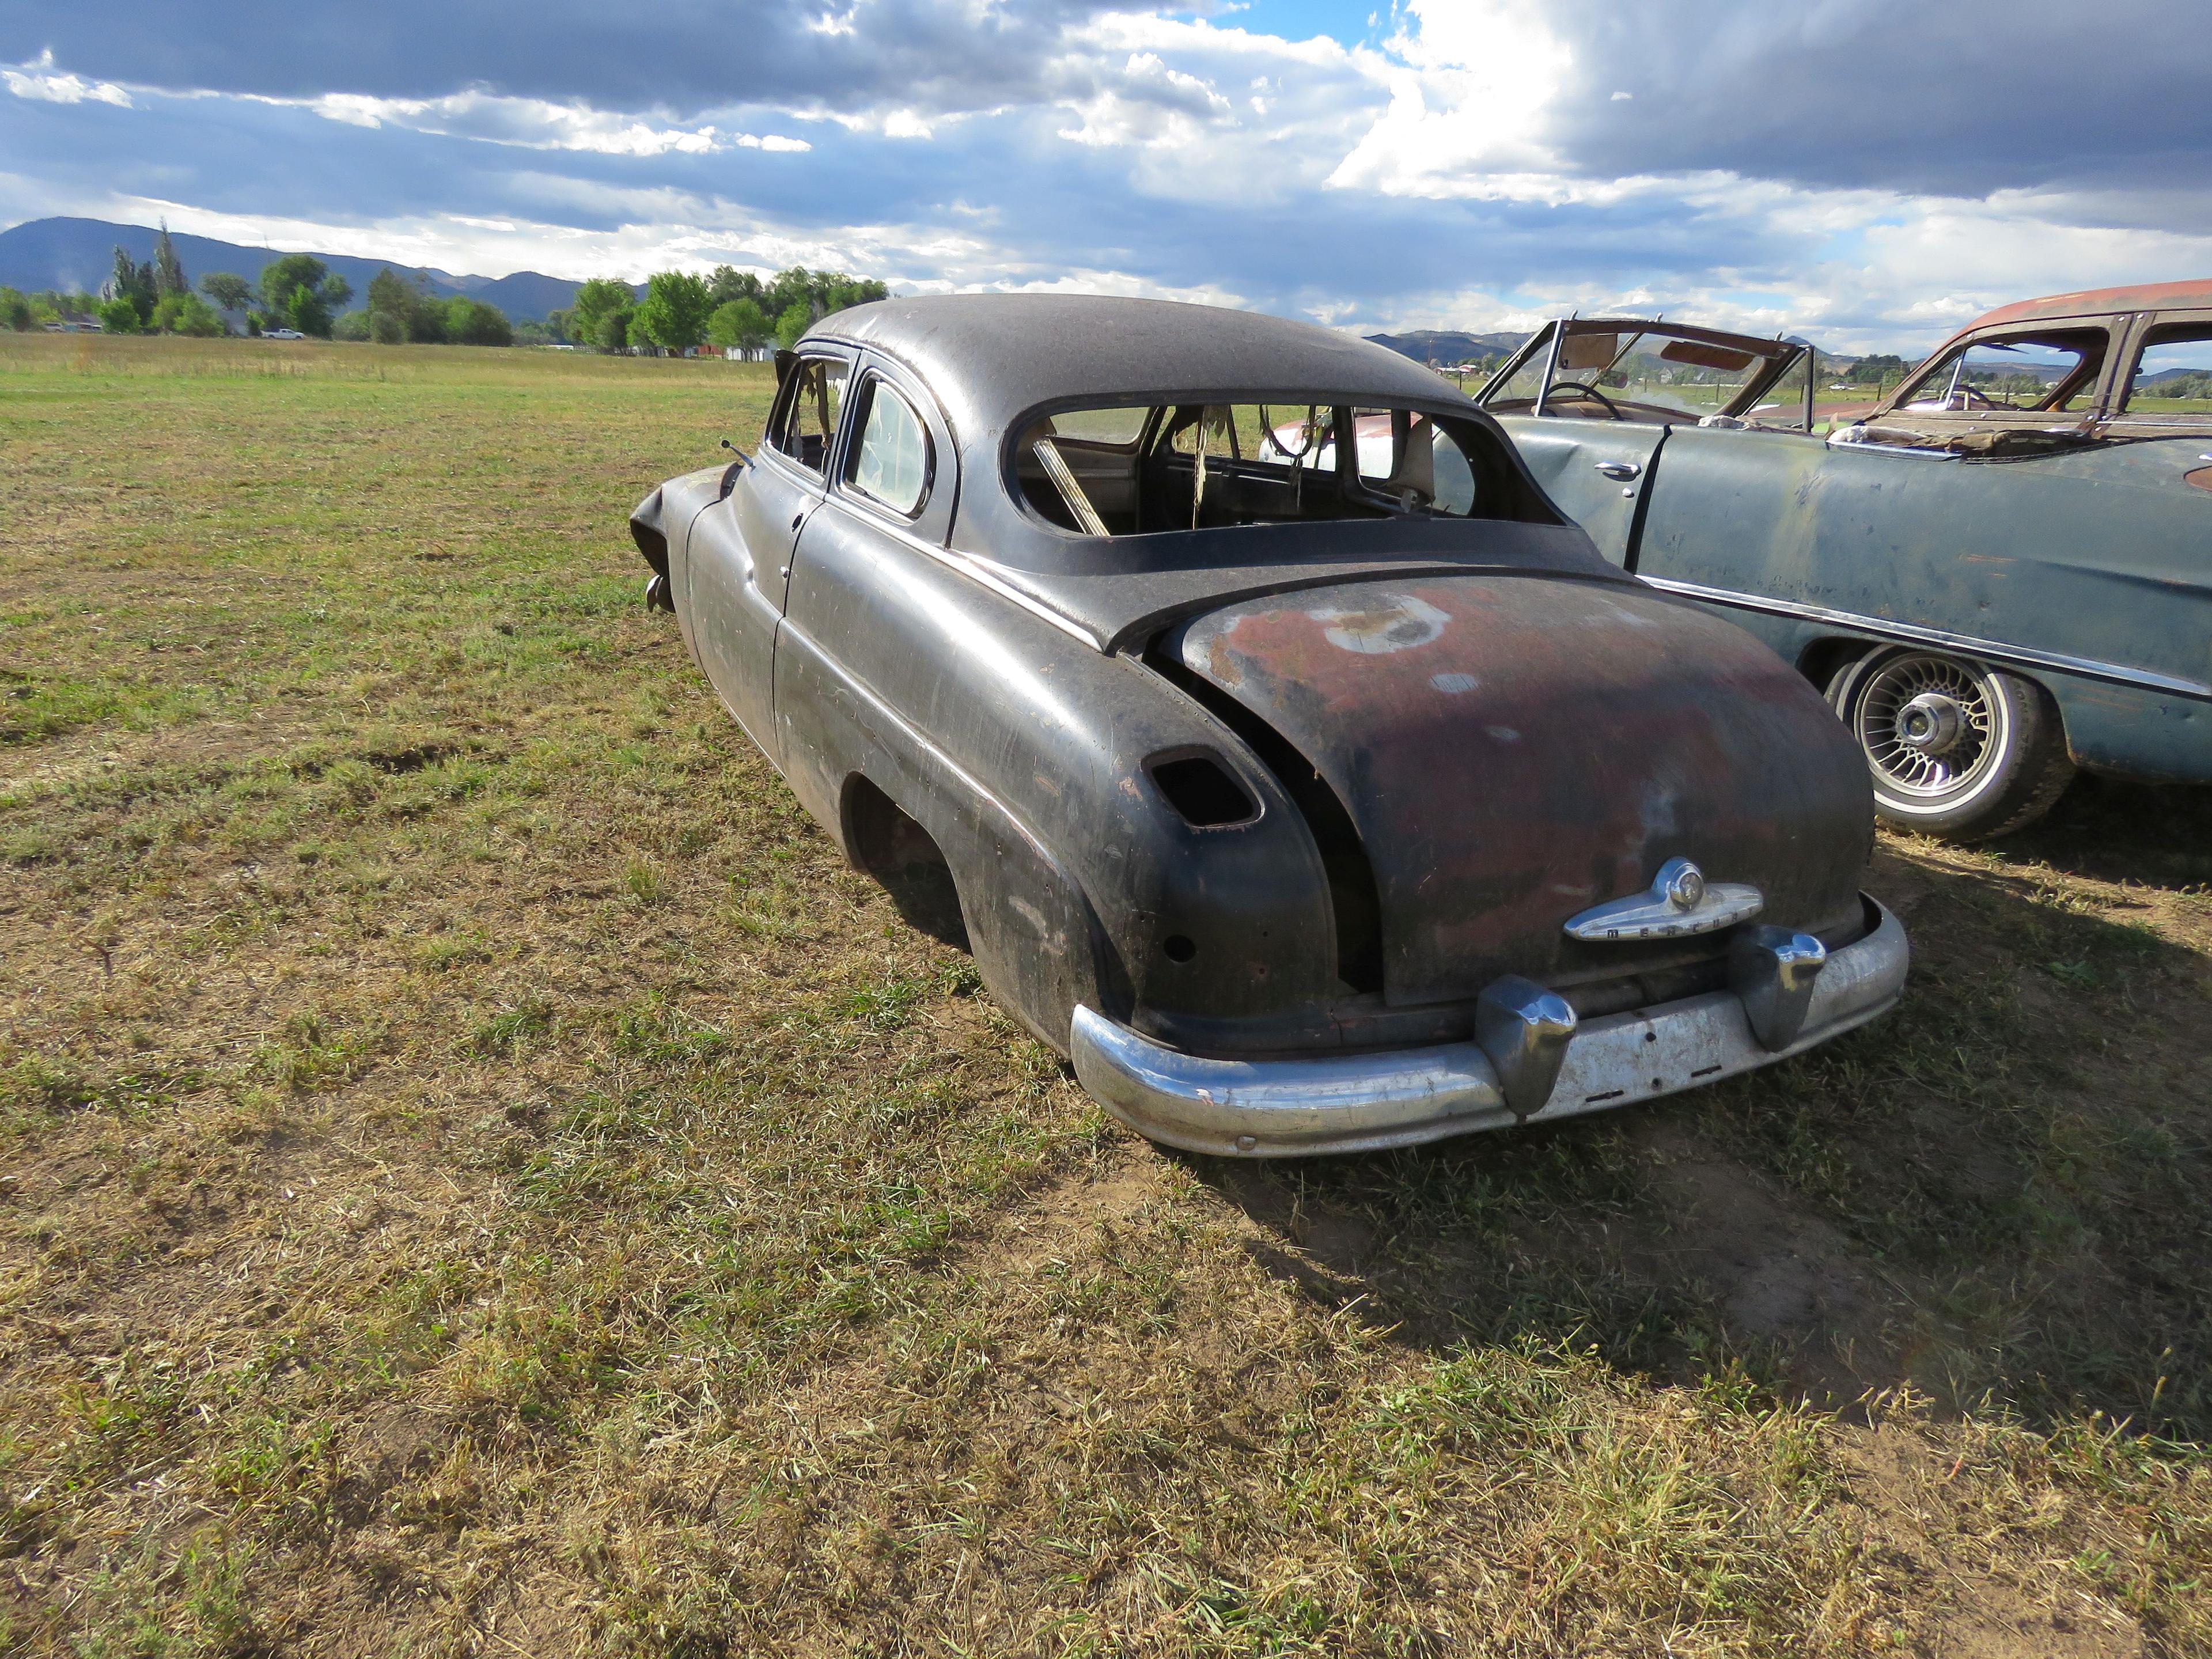 1949 Mercury Sedan for Project or parts